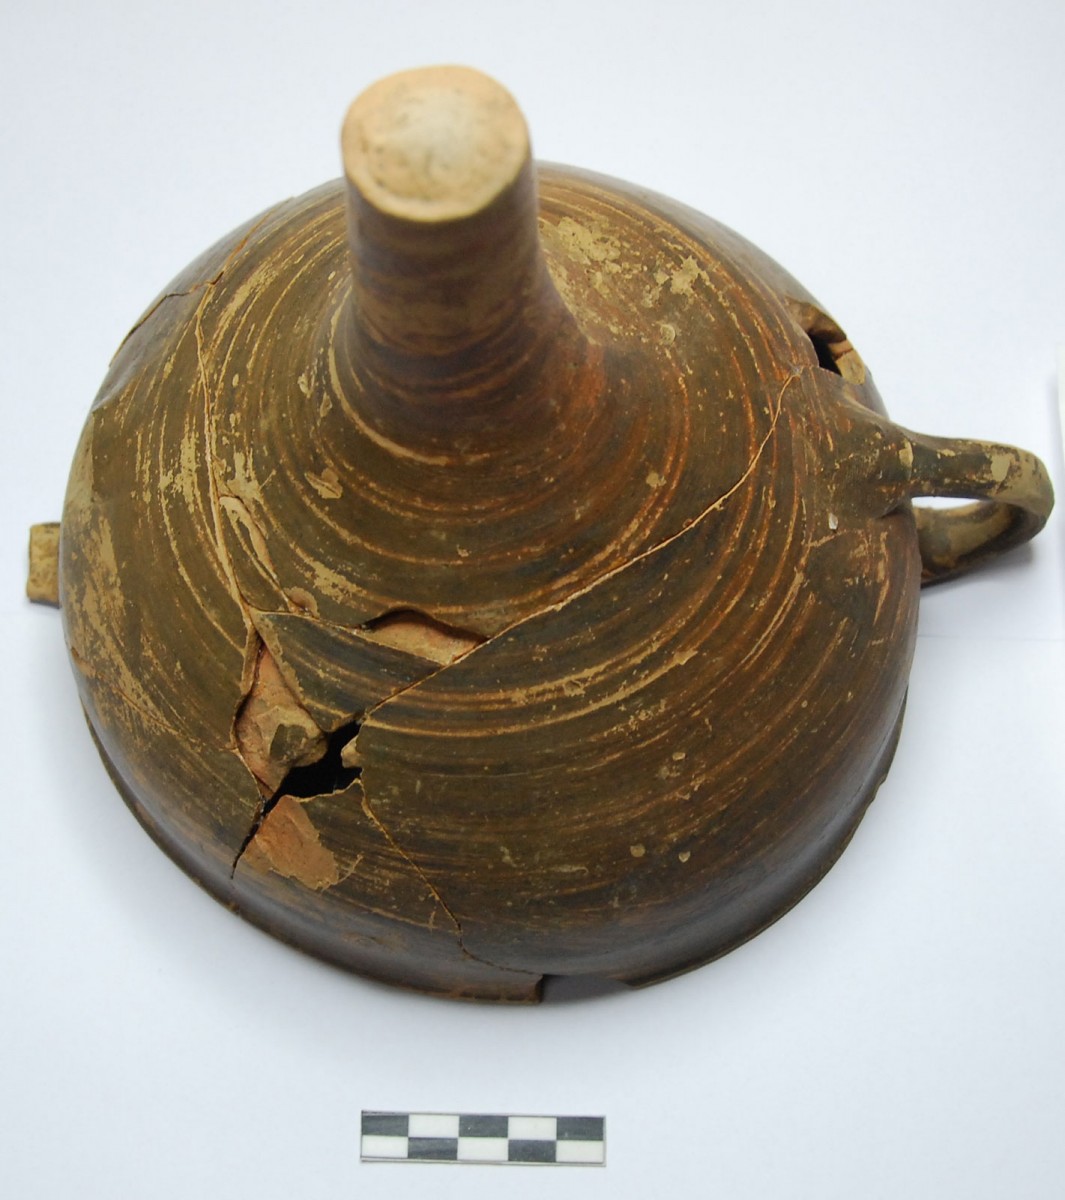 Fig. 11. In the interior of the buildings Mycenaean style, handmade and wheel-made vessels were revealed among other finds. Photo: Ephorate of Antiquities of Pieria